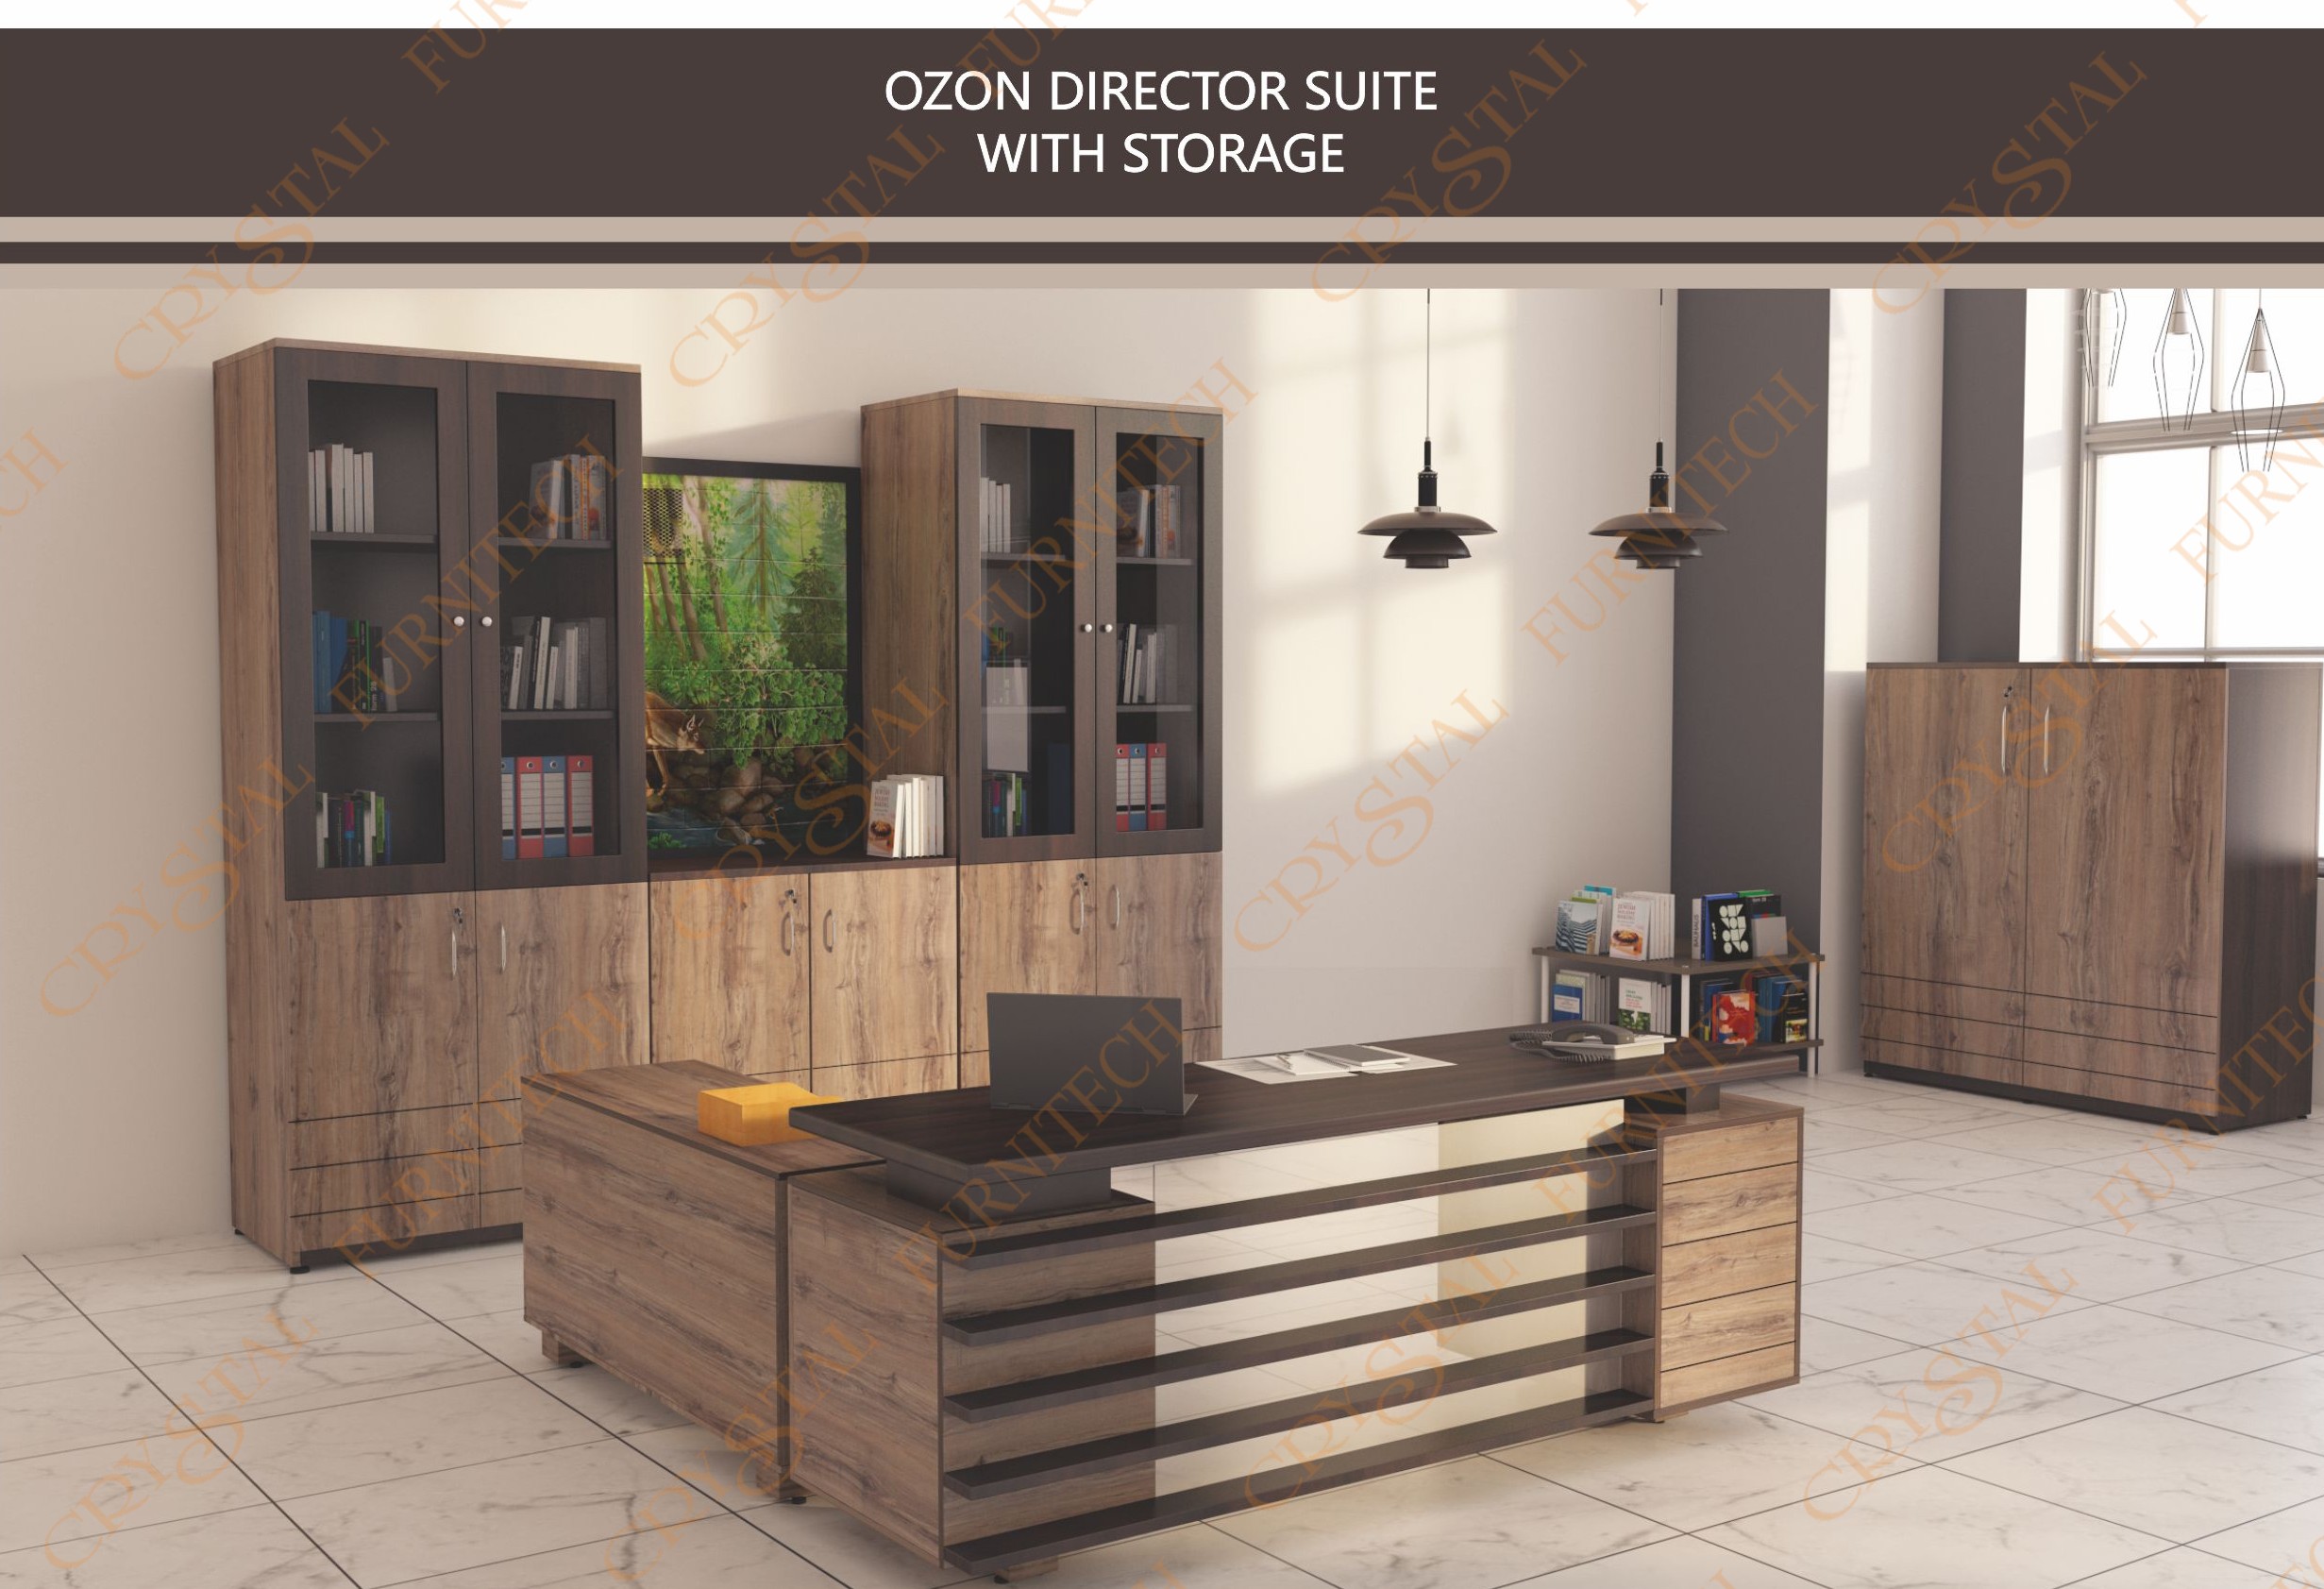 images/products/Office-Furniture-Ozon-Director-Suite-with-storage_1657086215.jpg